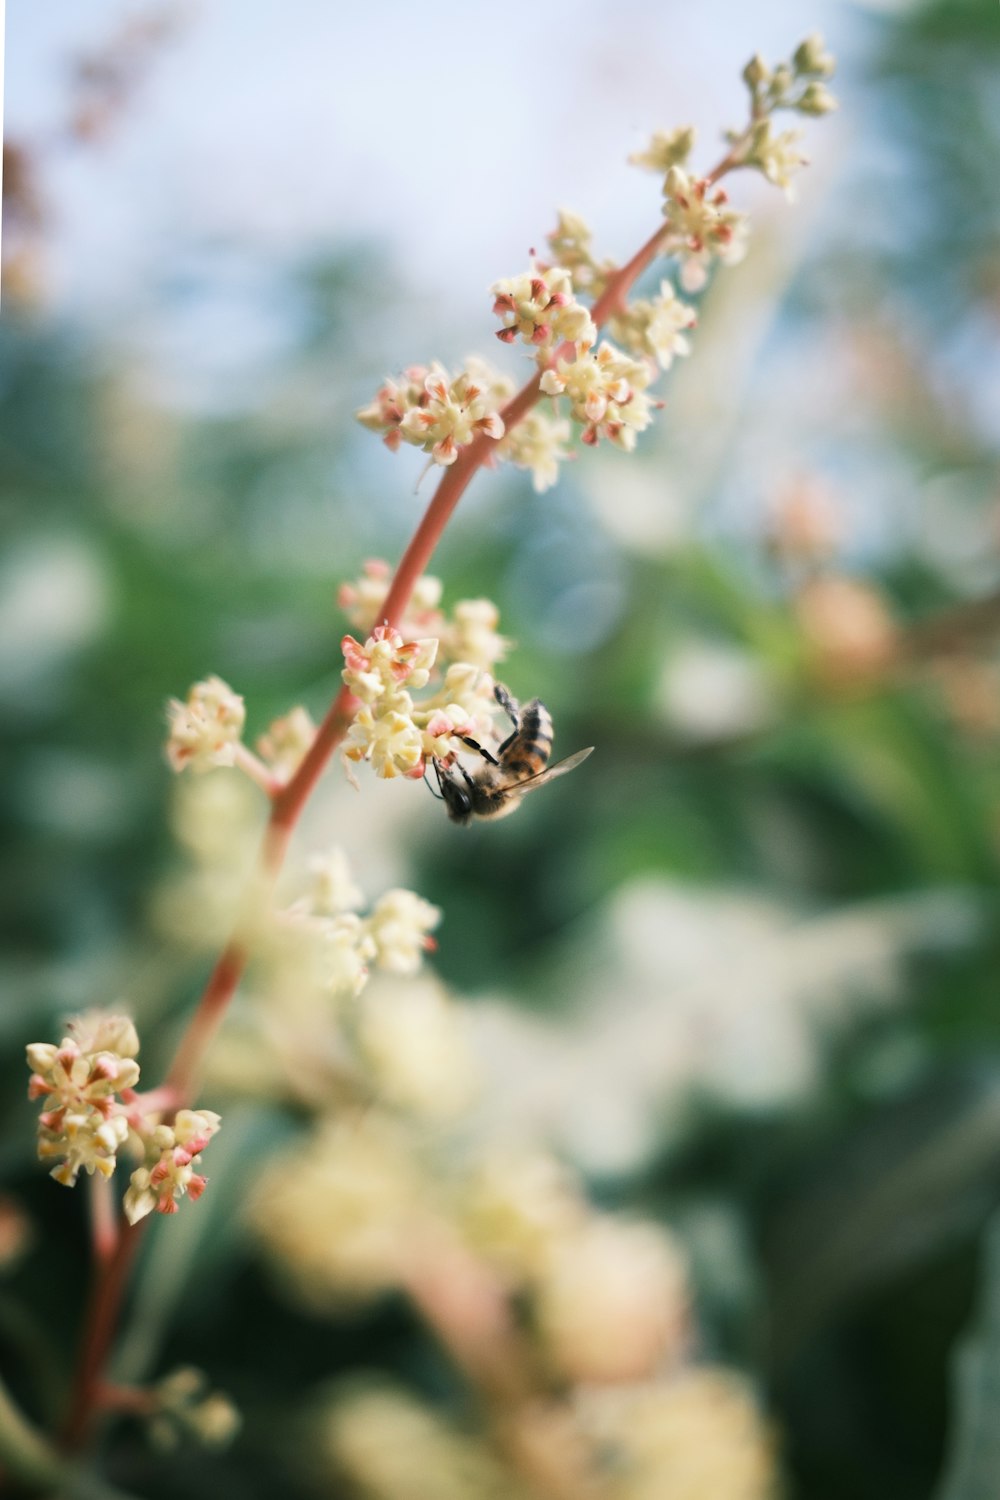 honeybee perched on white and red flower in close up photography during daytime